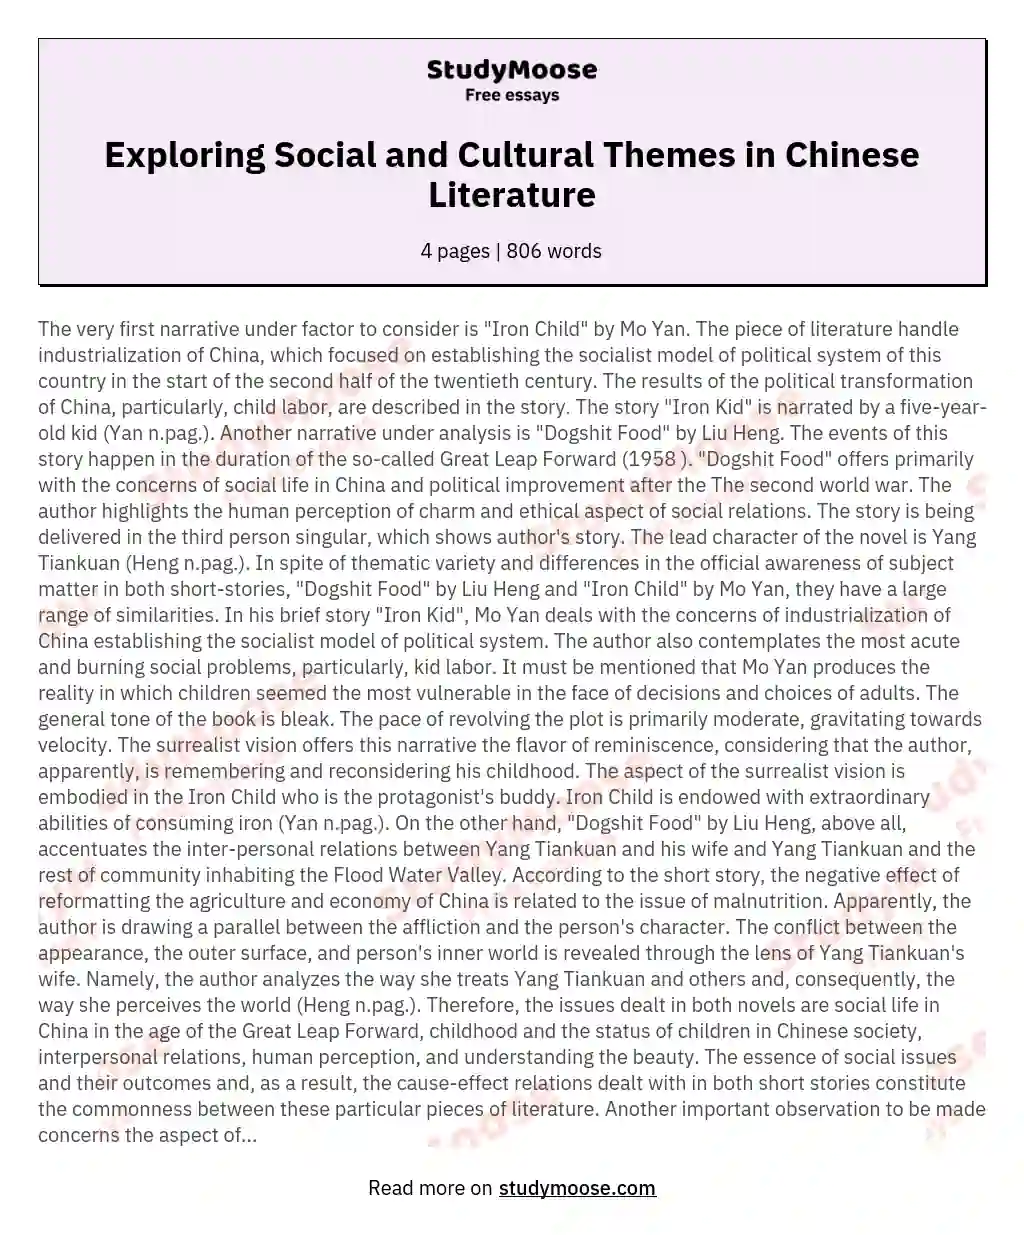 Exploring Social and Cultural Themes in Chinese Literature essay